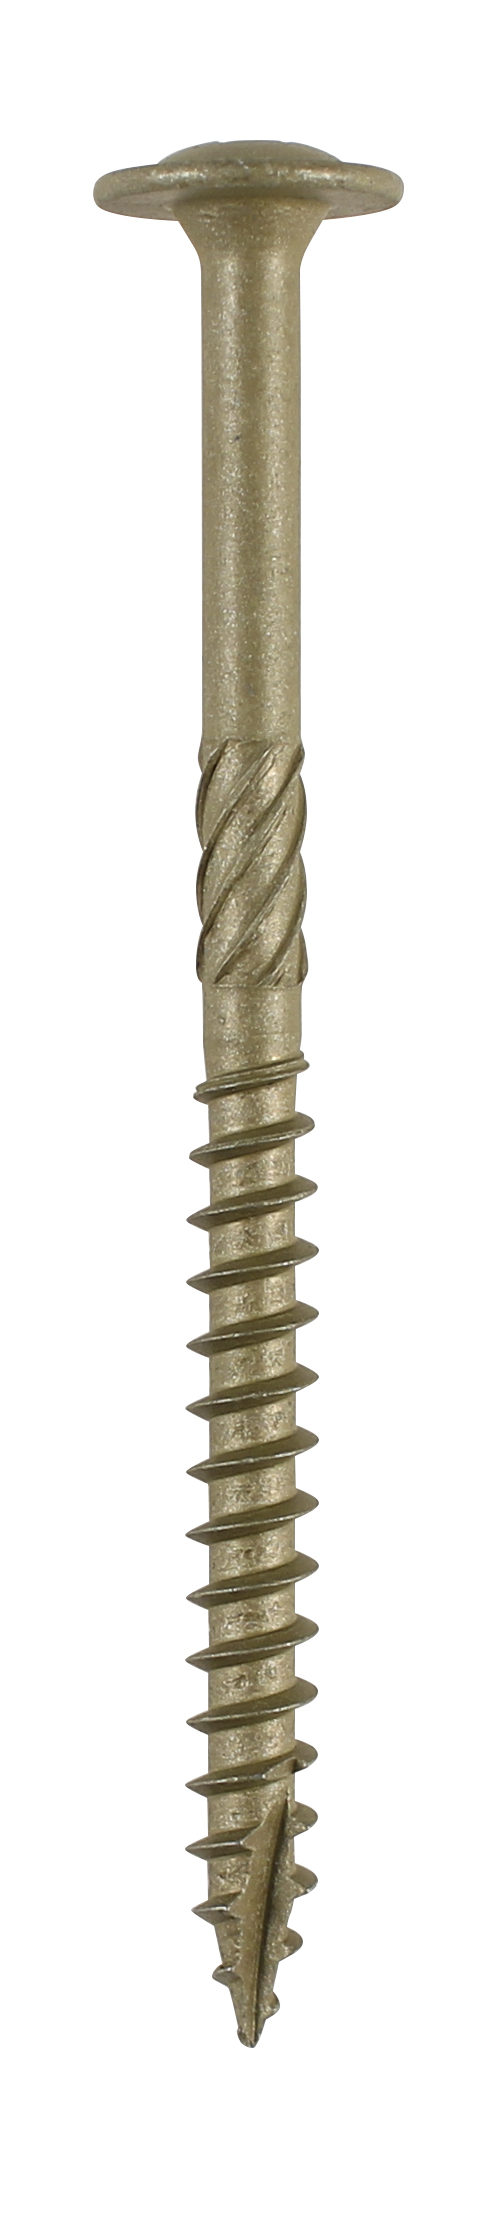 300mm Wafer Head Structural Timber Screws